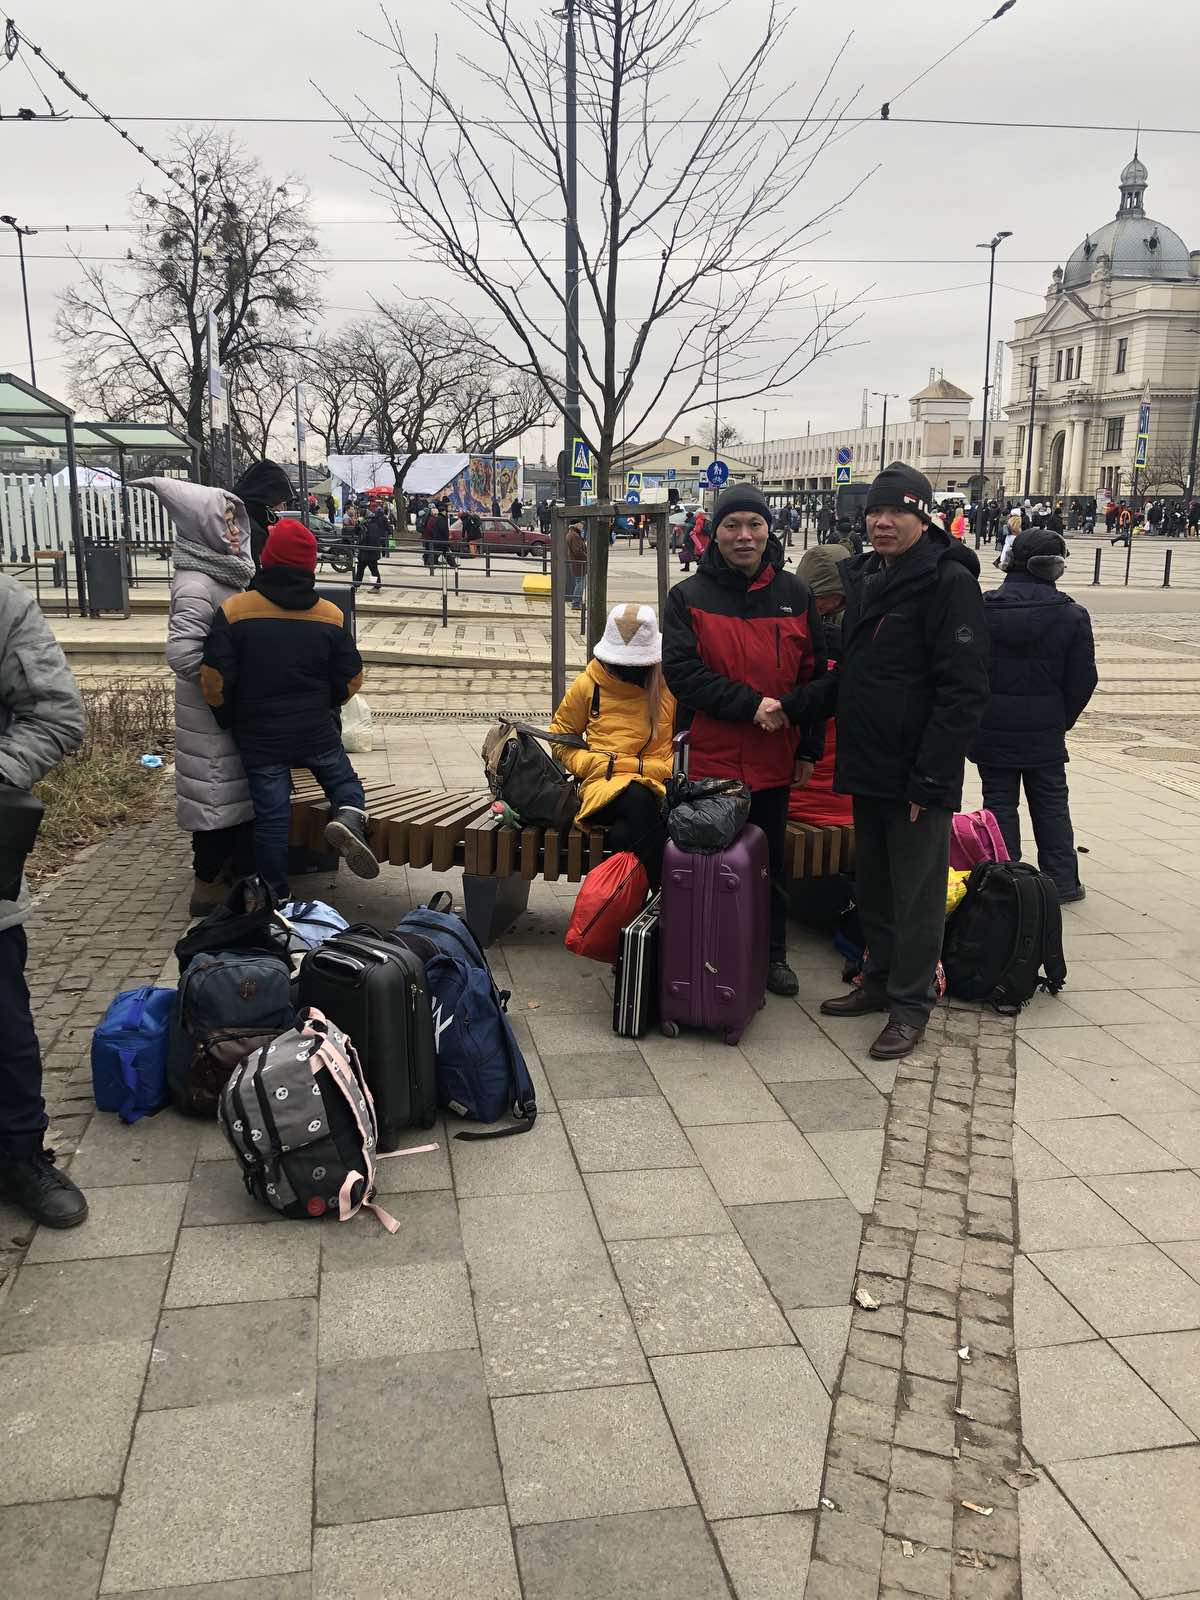 460 Vietnamese citizens evacuated from Ukraine: foreign ministry